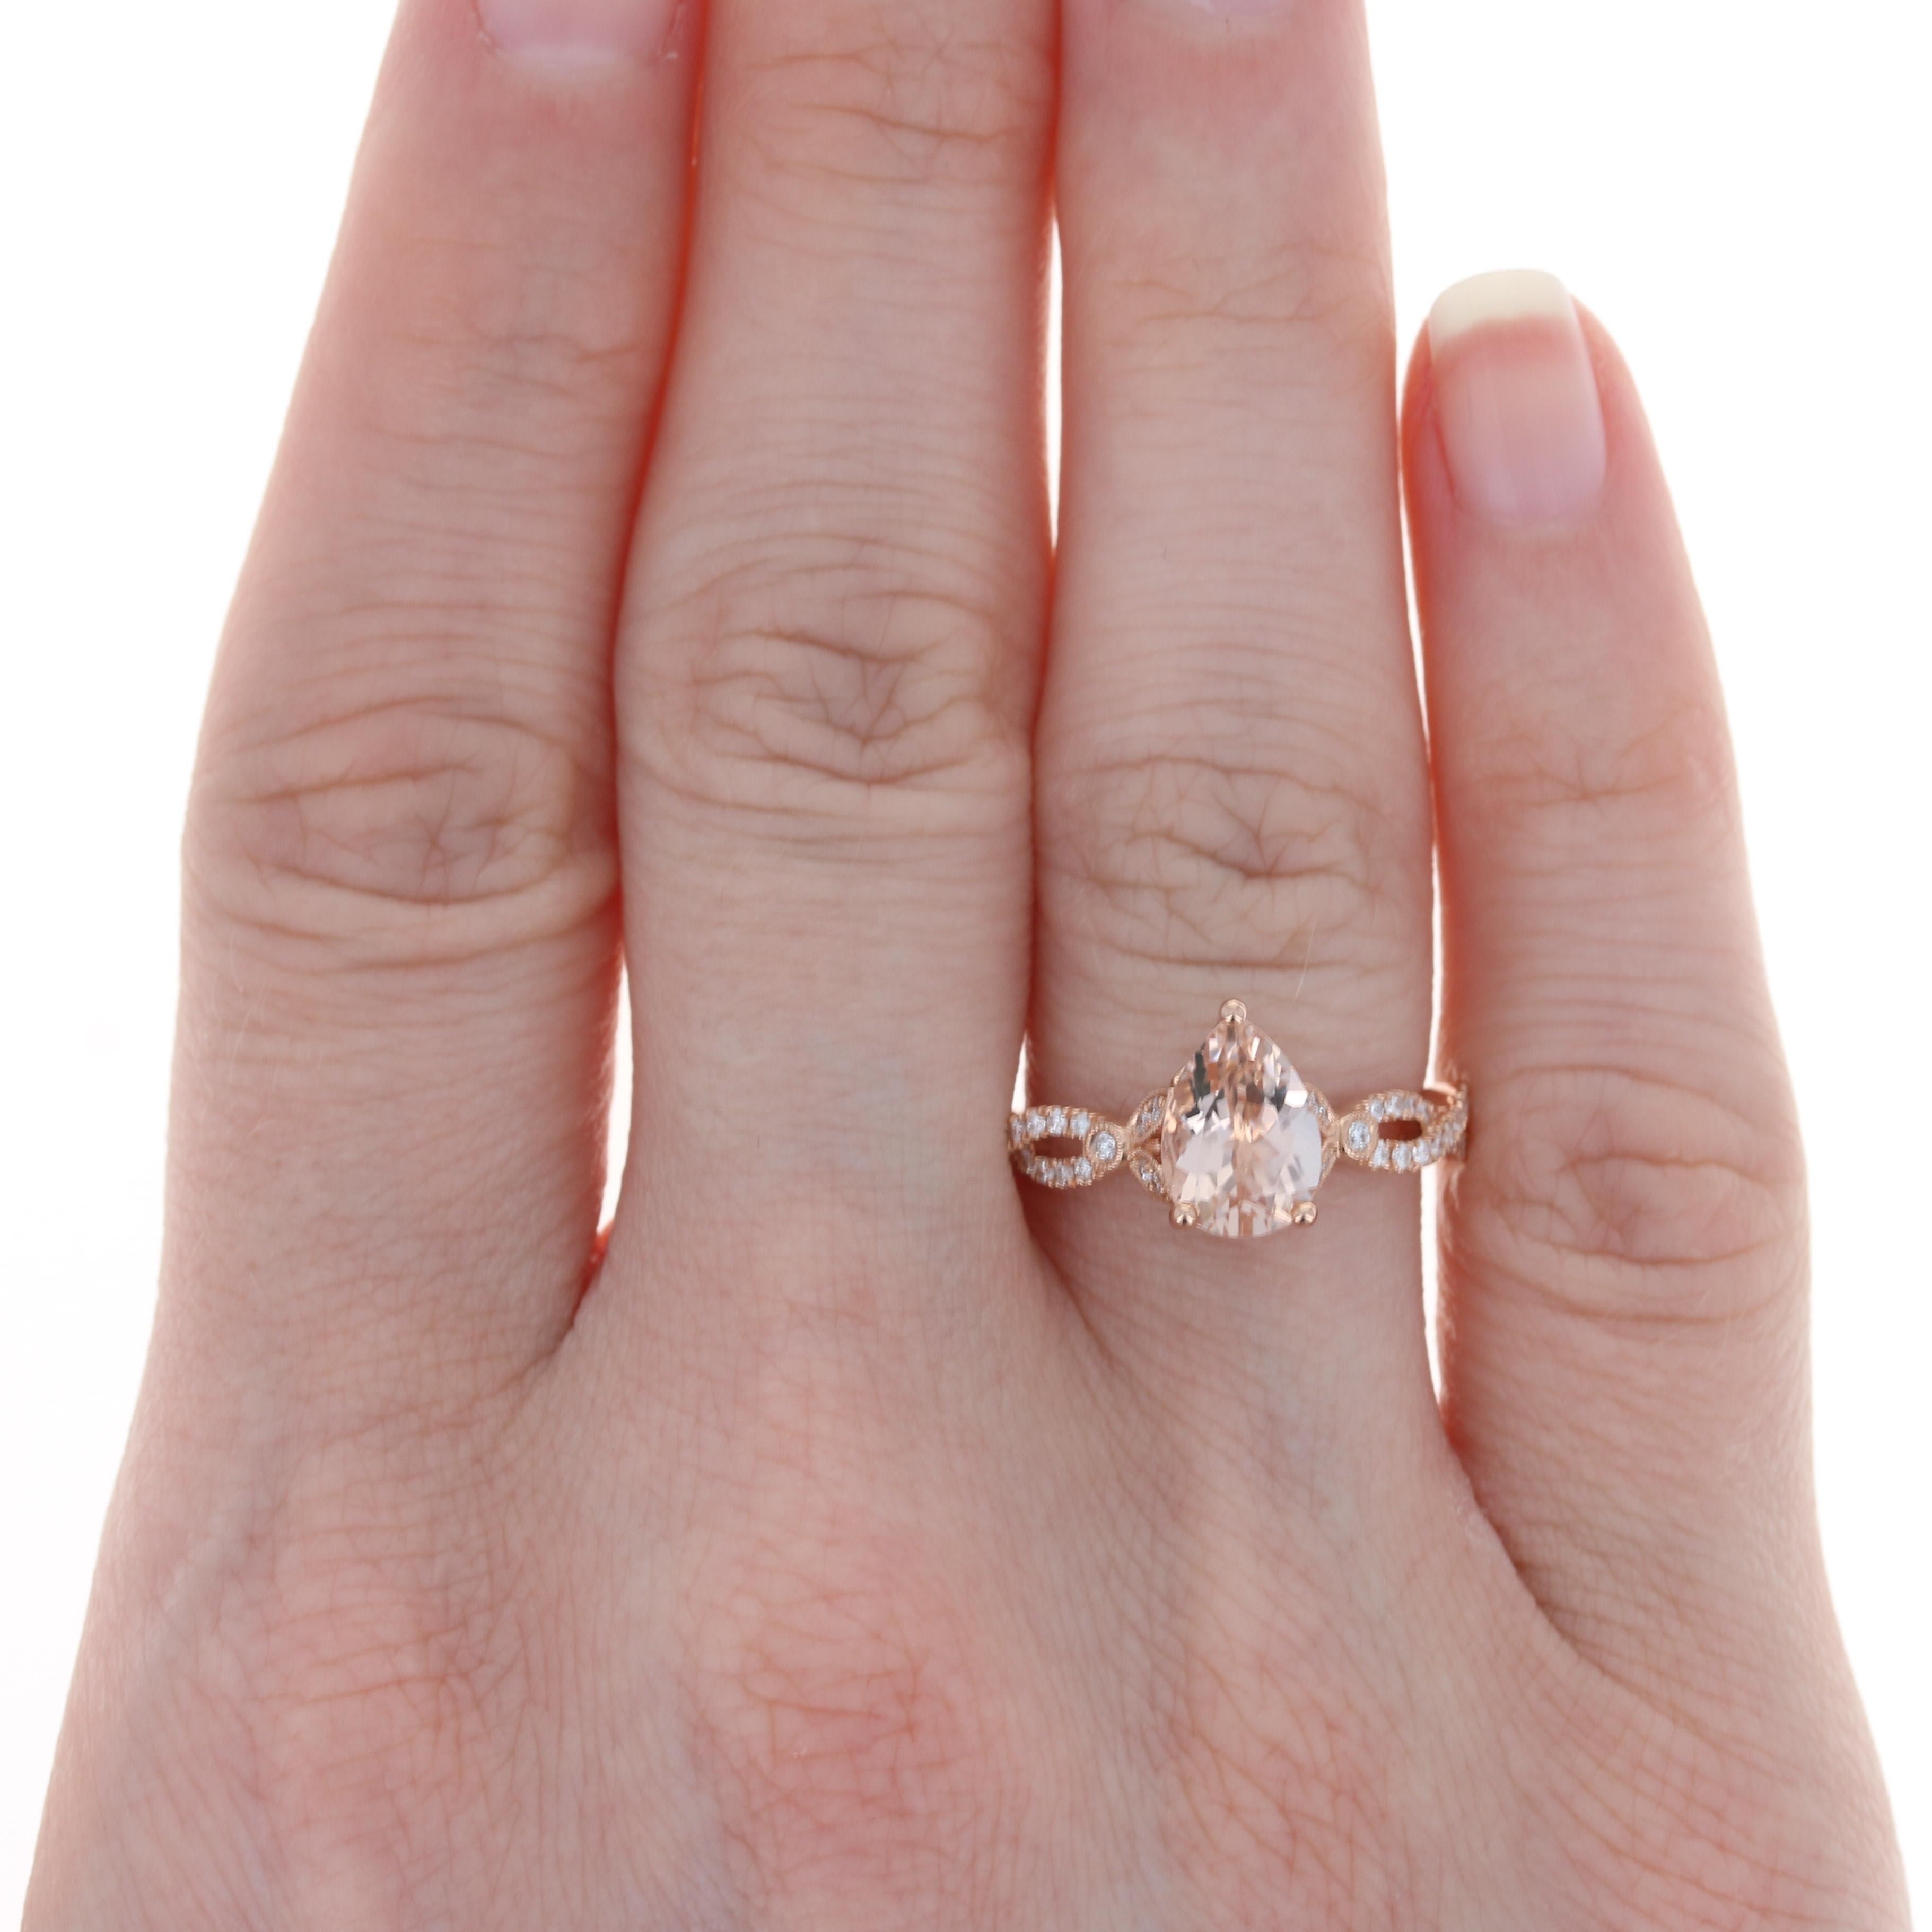 Size: 6 3/4
 Sizing Fee: Up 2 sizes or Down 1 size for $30 
 
 Brand: Clyde Duneier
 
 Metal Content: 14k Rose Gold 
 
 Stone Information: 
 Genuine Morganite
 Carat: 1.90ct
 Cut: Pear
 Color: Pink
 
 Natural Diamonds 
 Carats: .38ctw
 Cut: Round